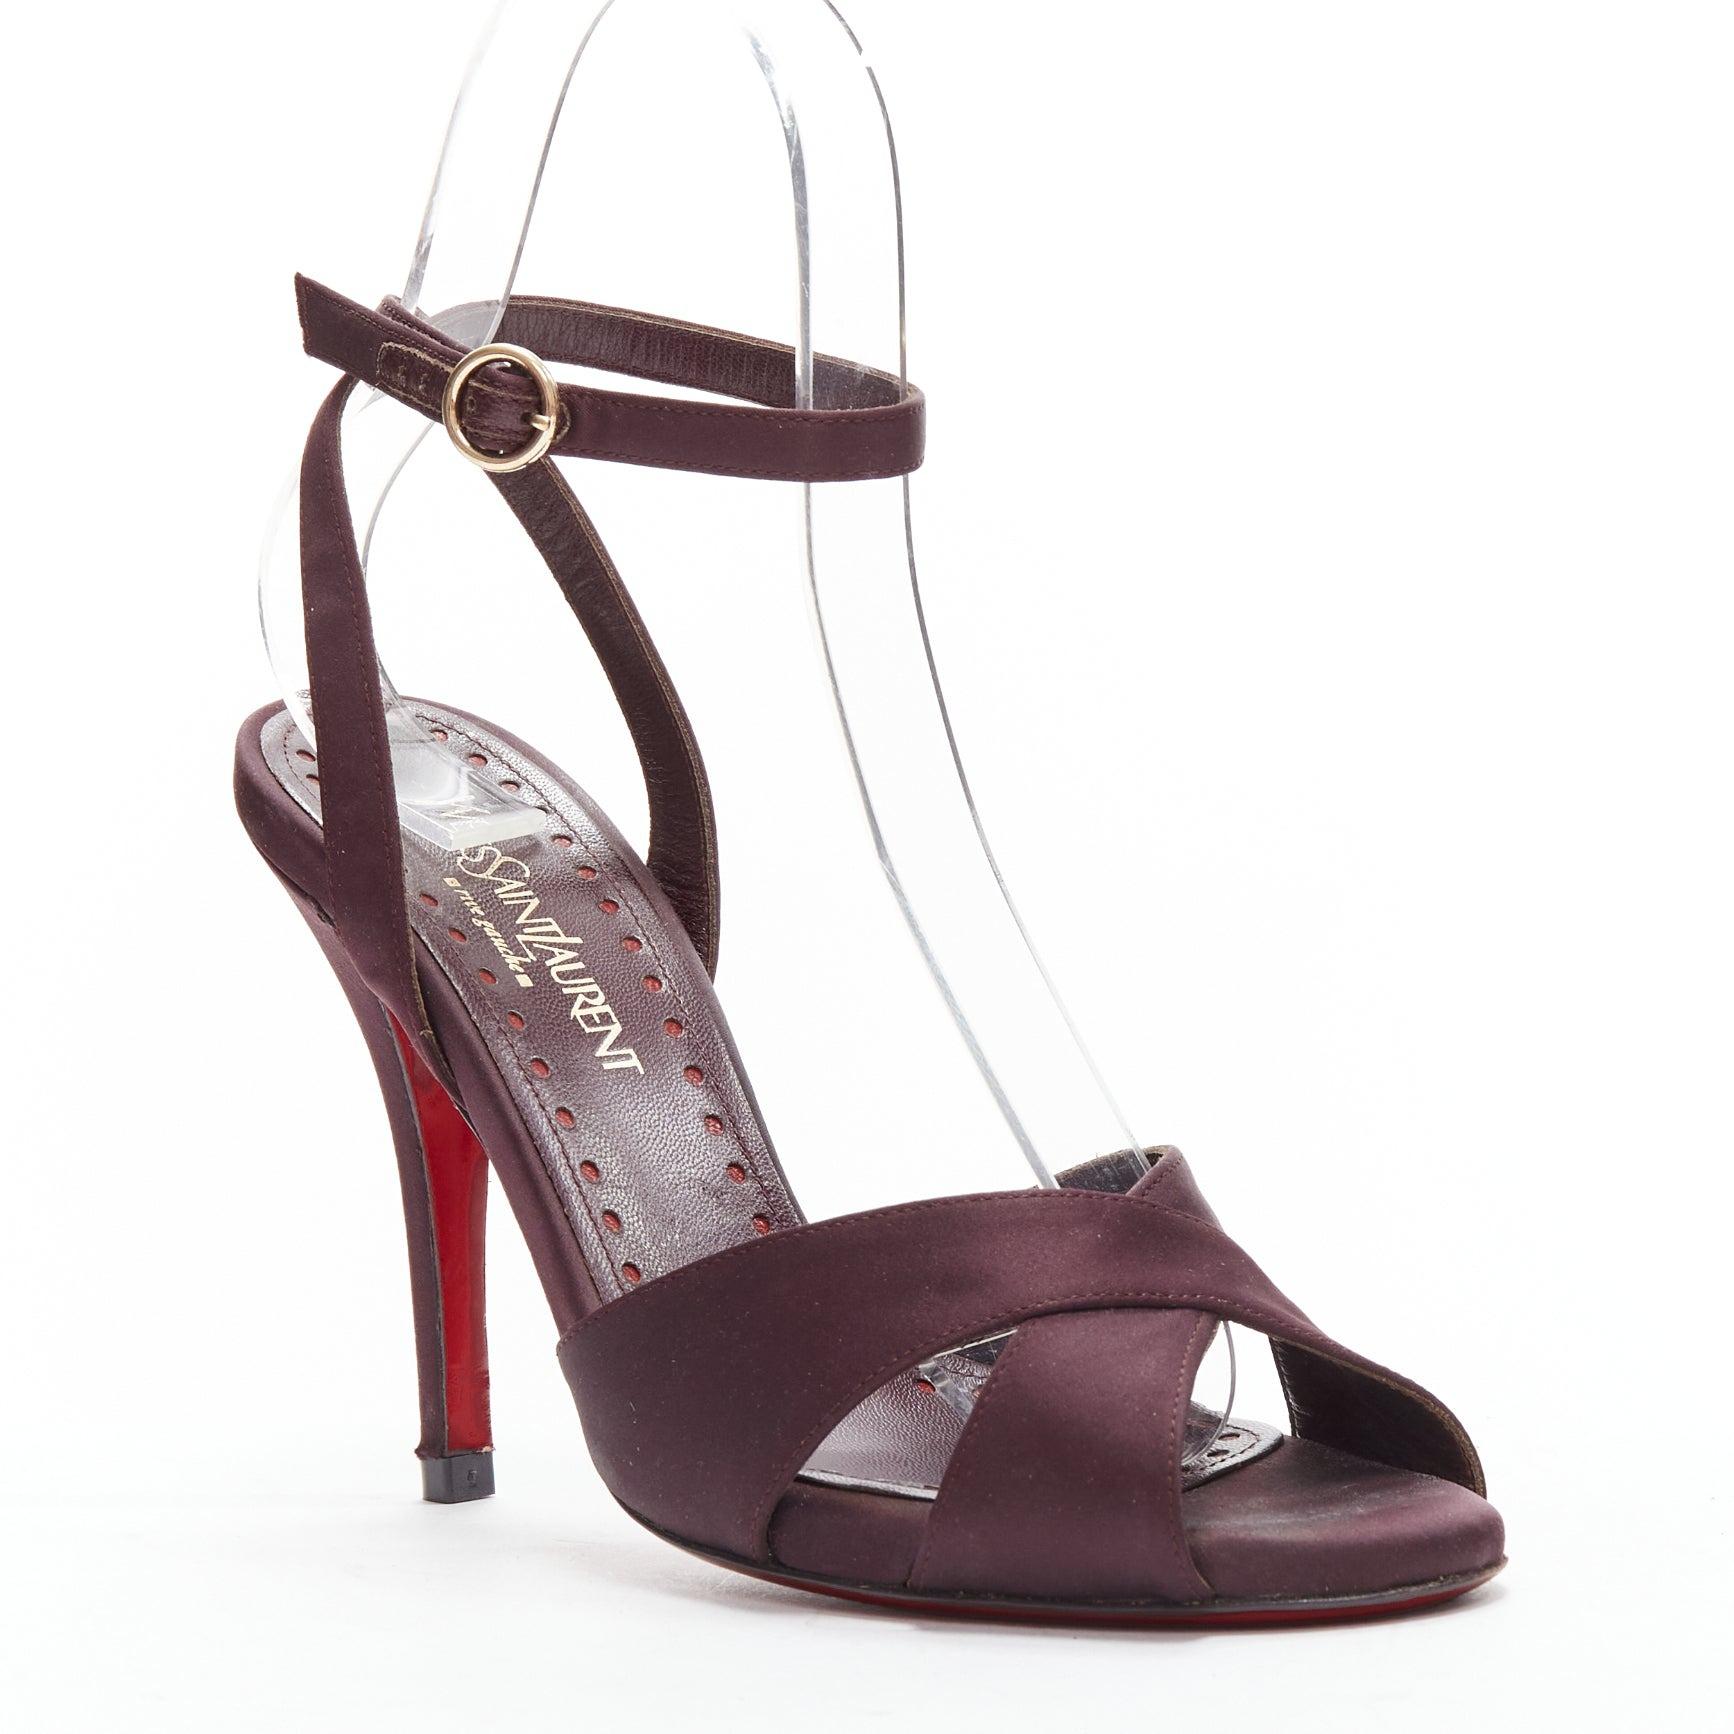 YVES SAINT LAURENT dark purple satin red sole sandal heels EU38
Reference: GIYG/A00376
Brand: Yves Saint Laurent
Material: Satin
Color: Purple
Pattern: Solid
Closure: Ankle Strap
Lining: Burgundy Leather
Extra Details: Red sole design
Made in: